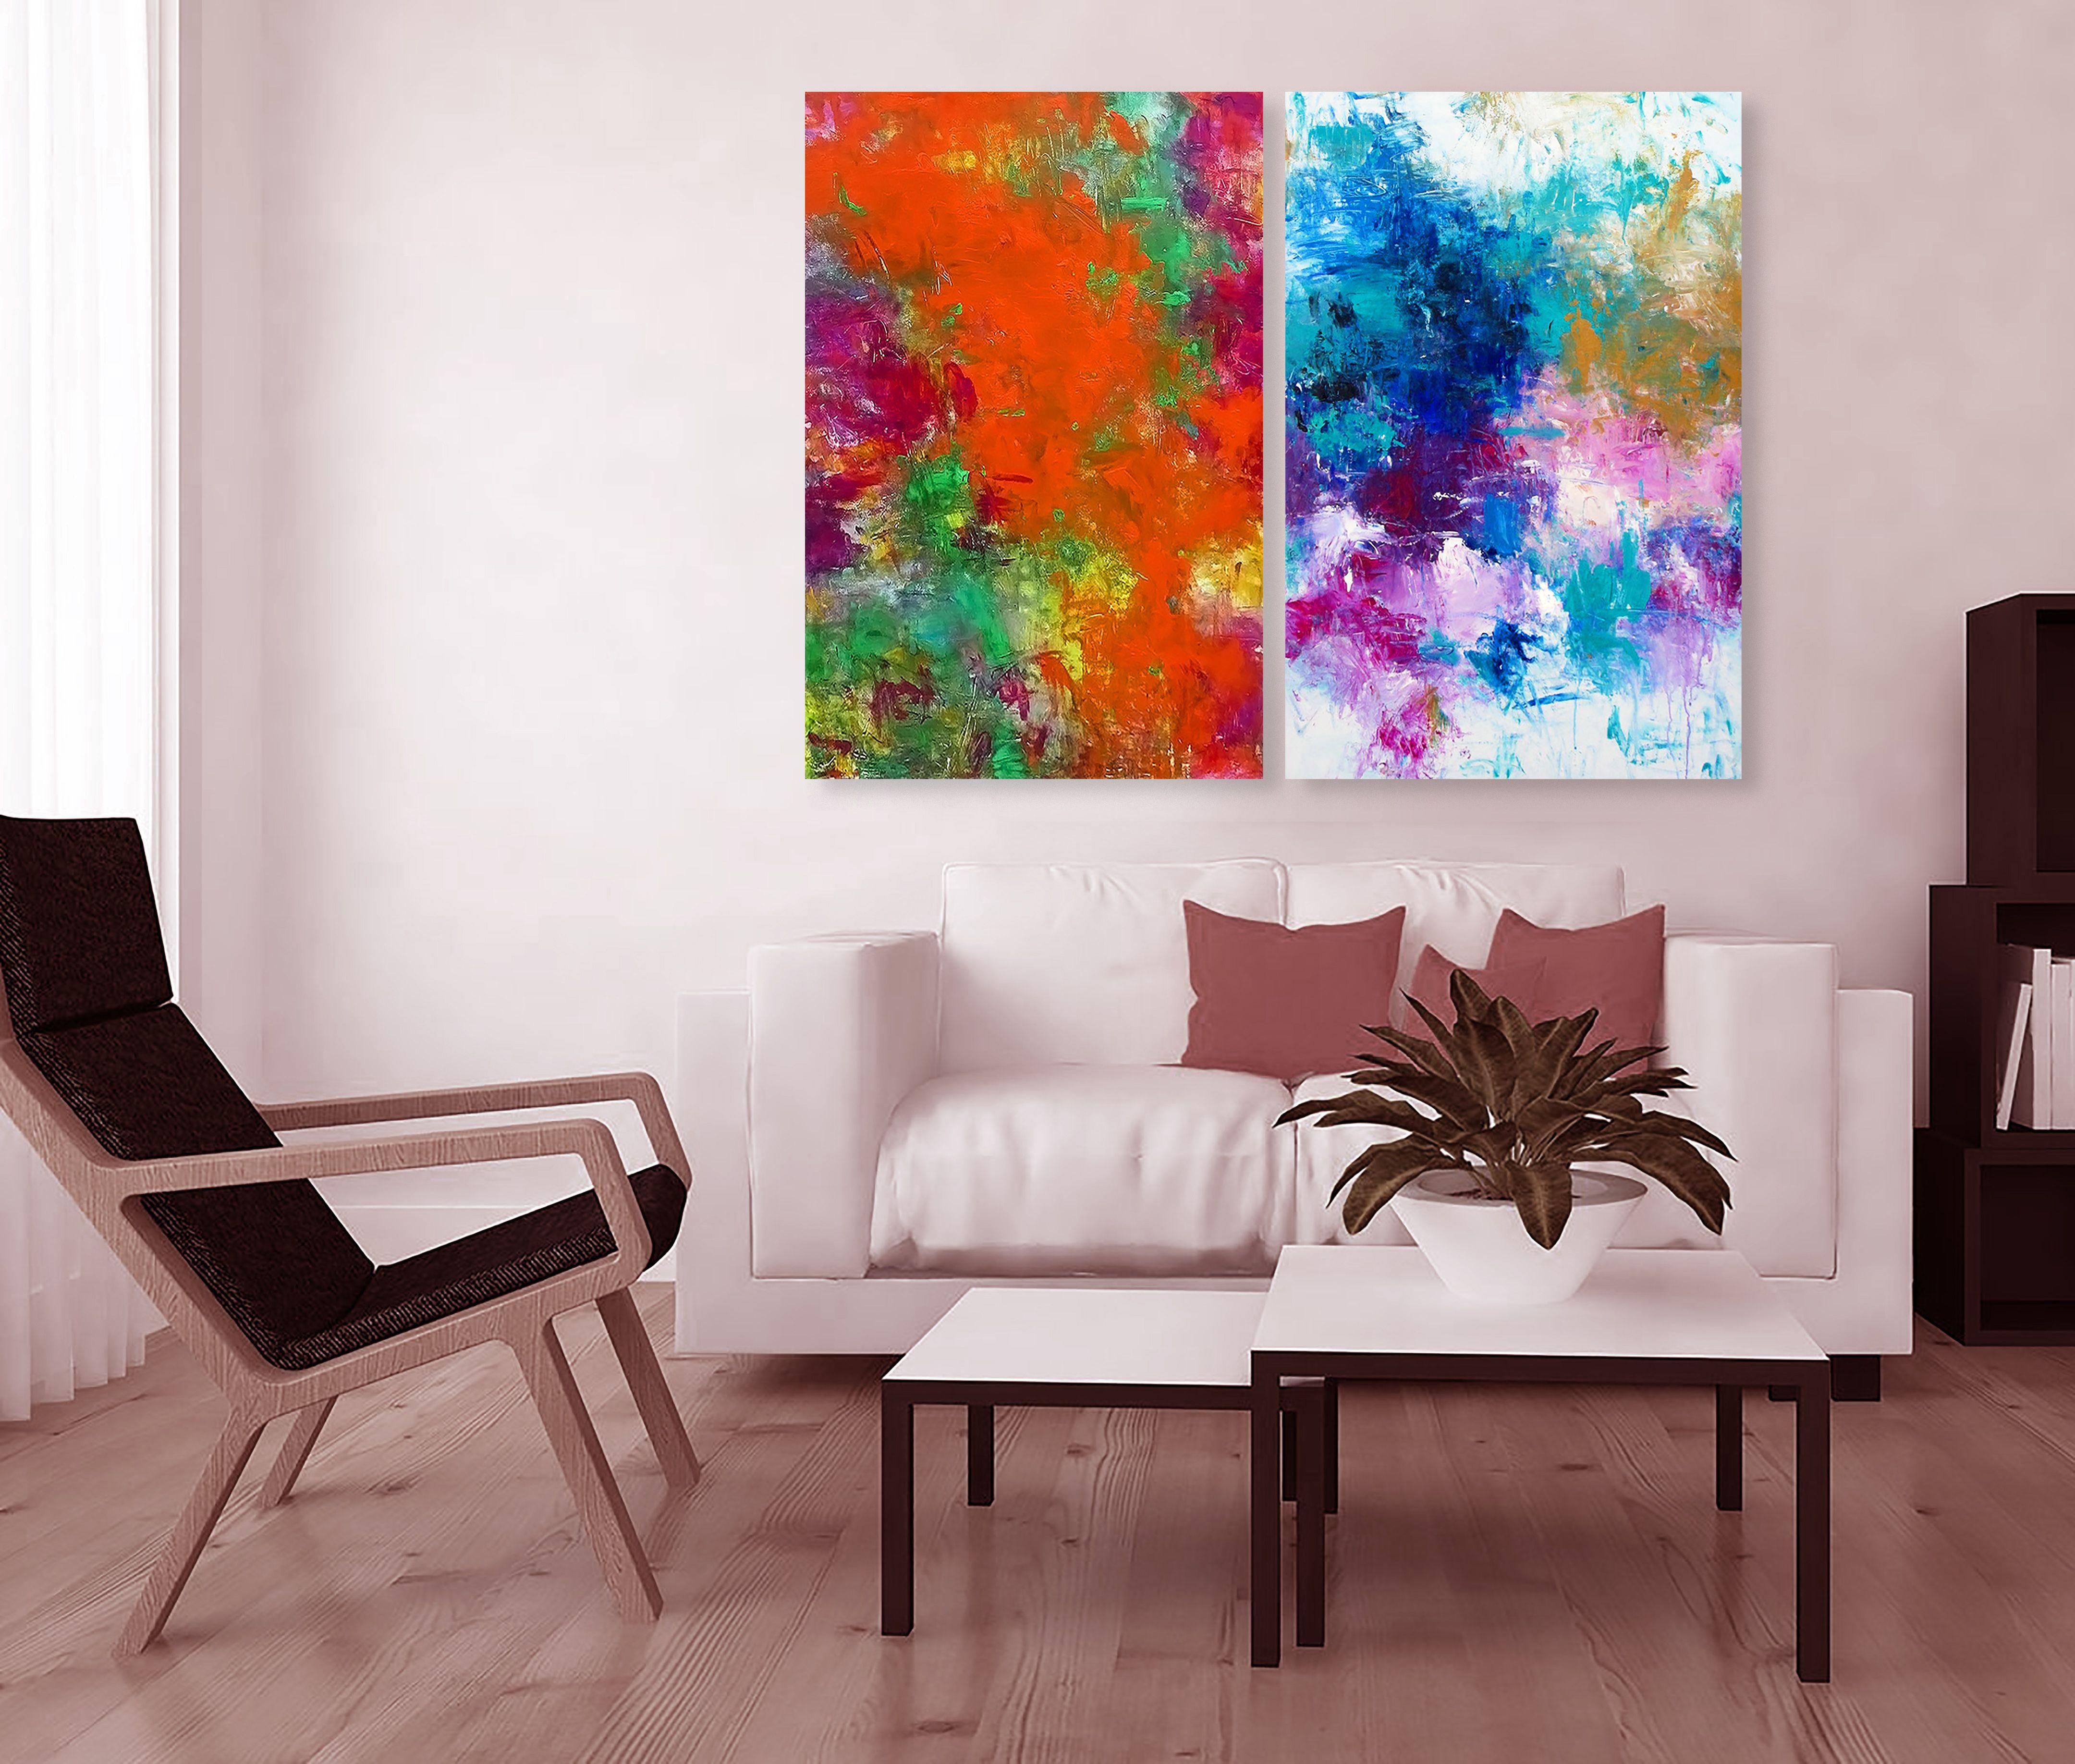 4 paintings that go together